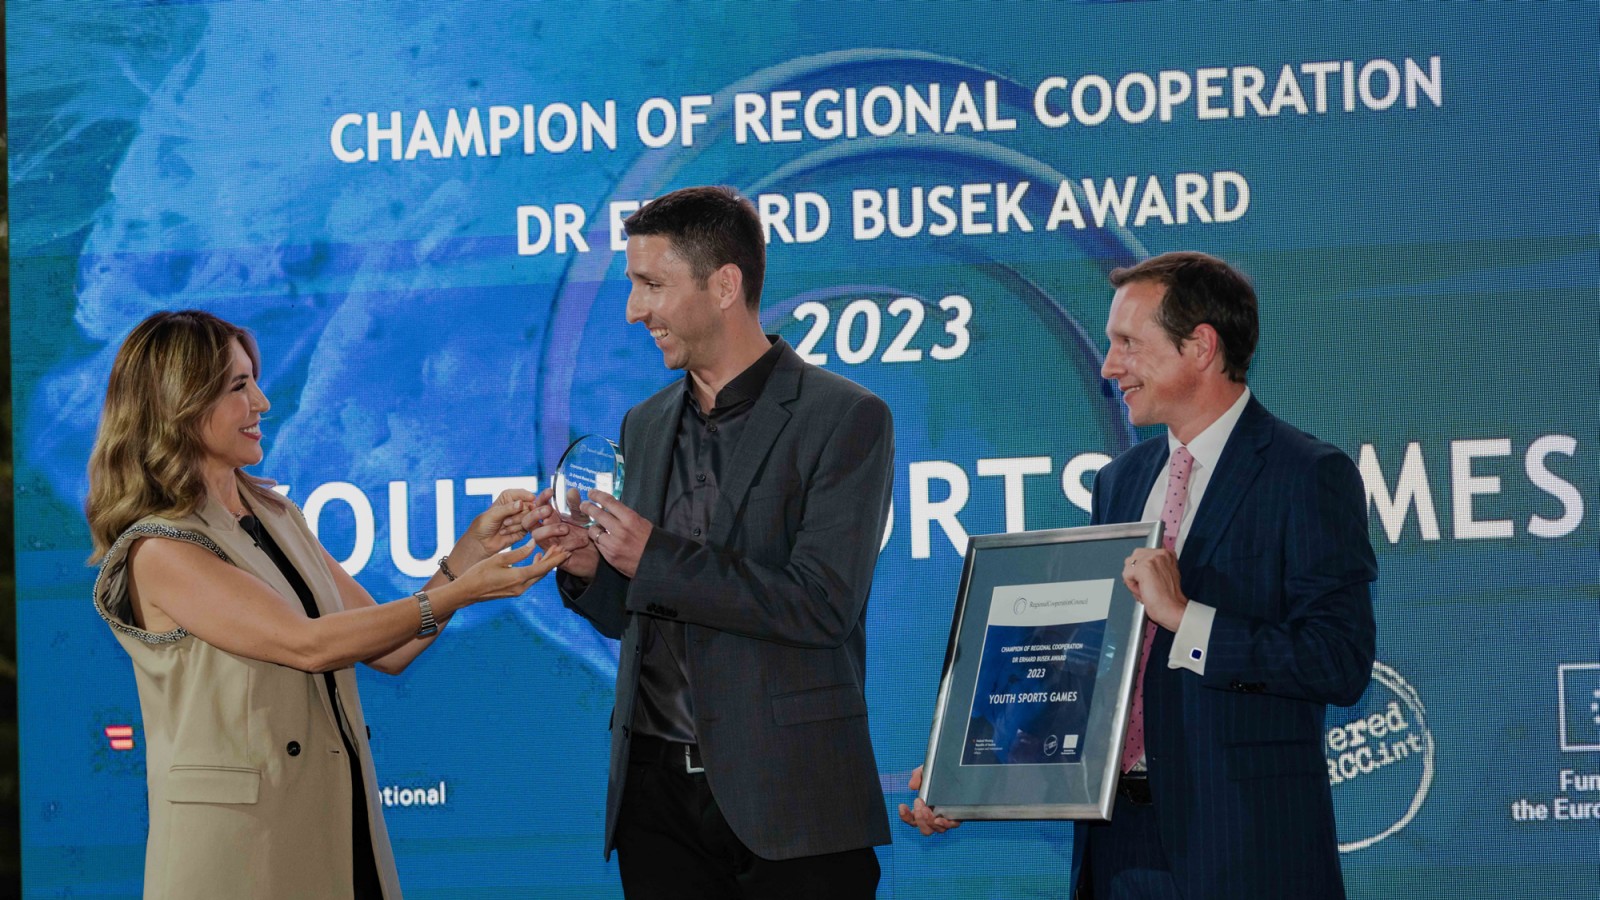 Youth Sports Games won the Champion of Regional Cooperation Dr Erhard Busek Award